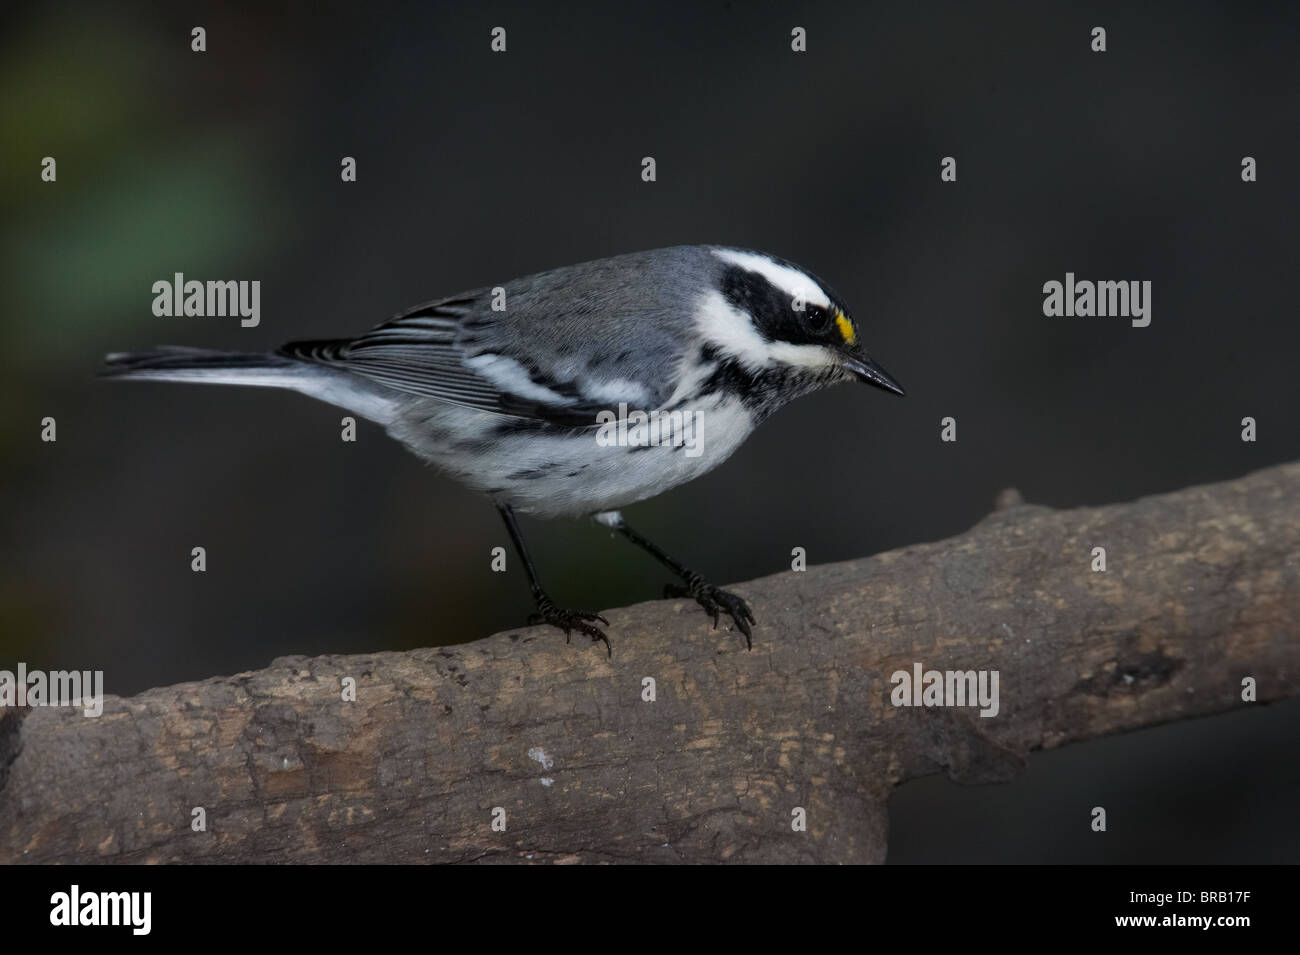 Adult Male Black-throated Gray Warbler Perched on a Branch Stock Photo